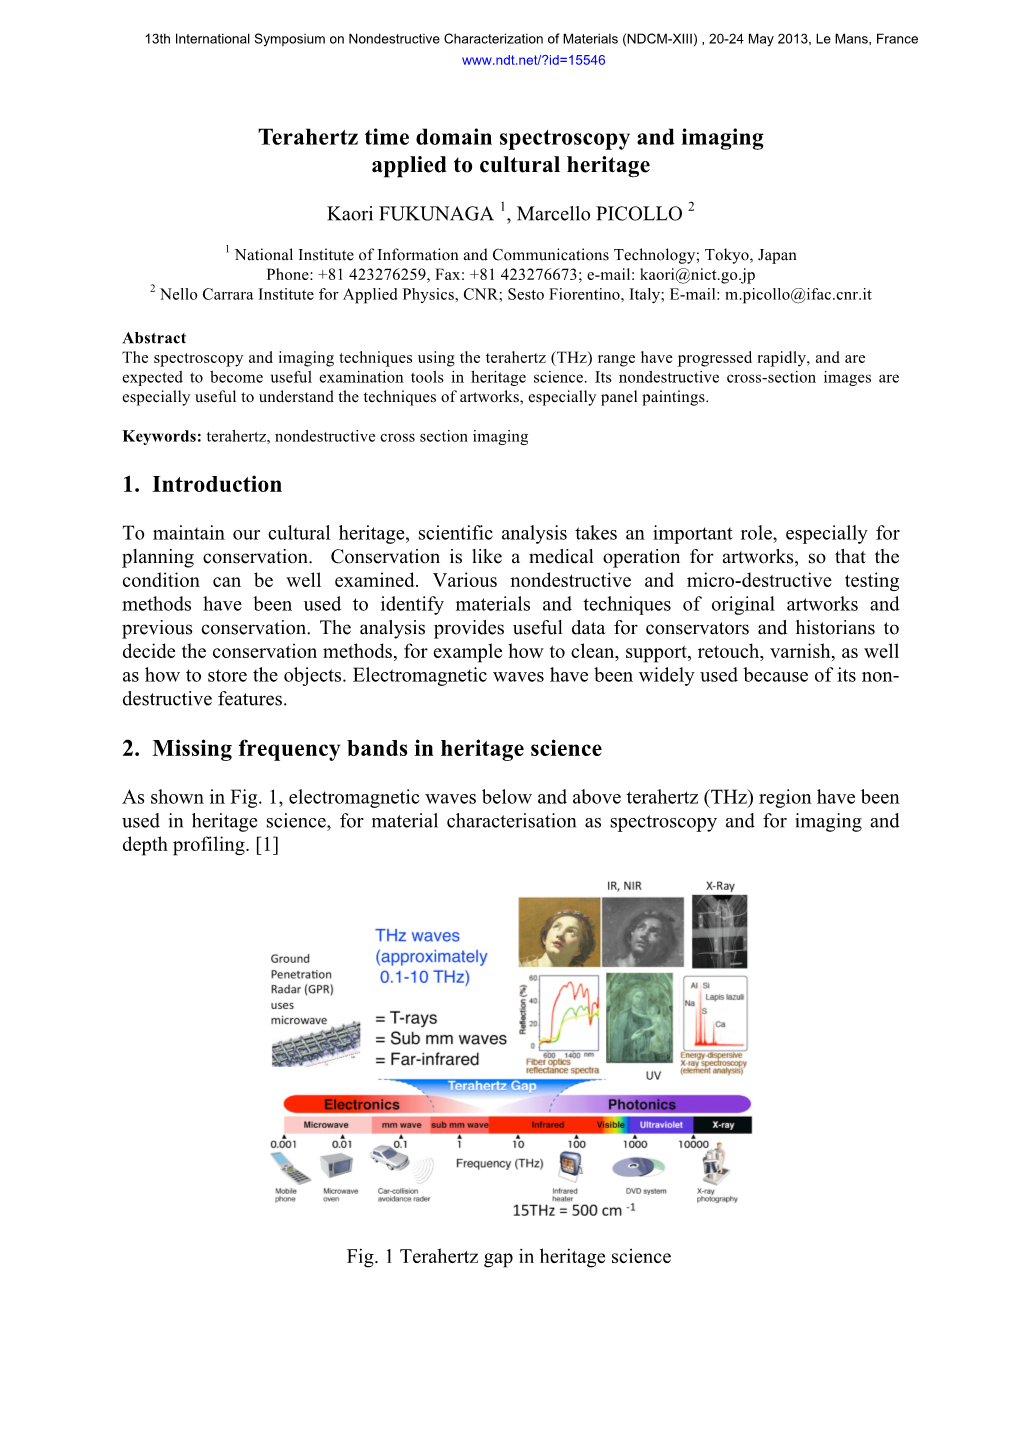 Terahertz Time Domain Spectroscopy and Imaging Applied to Cultural Heritage